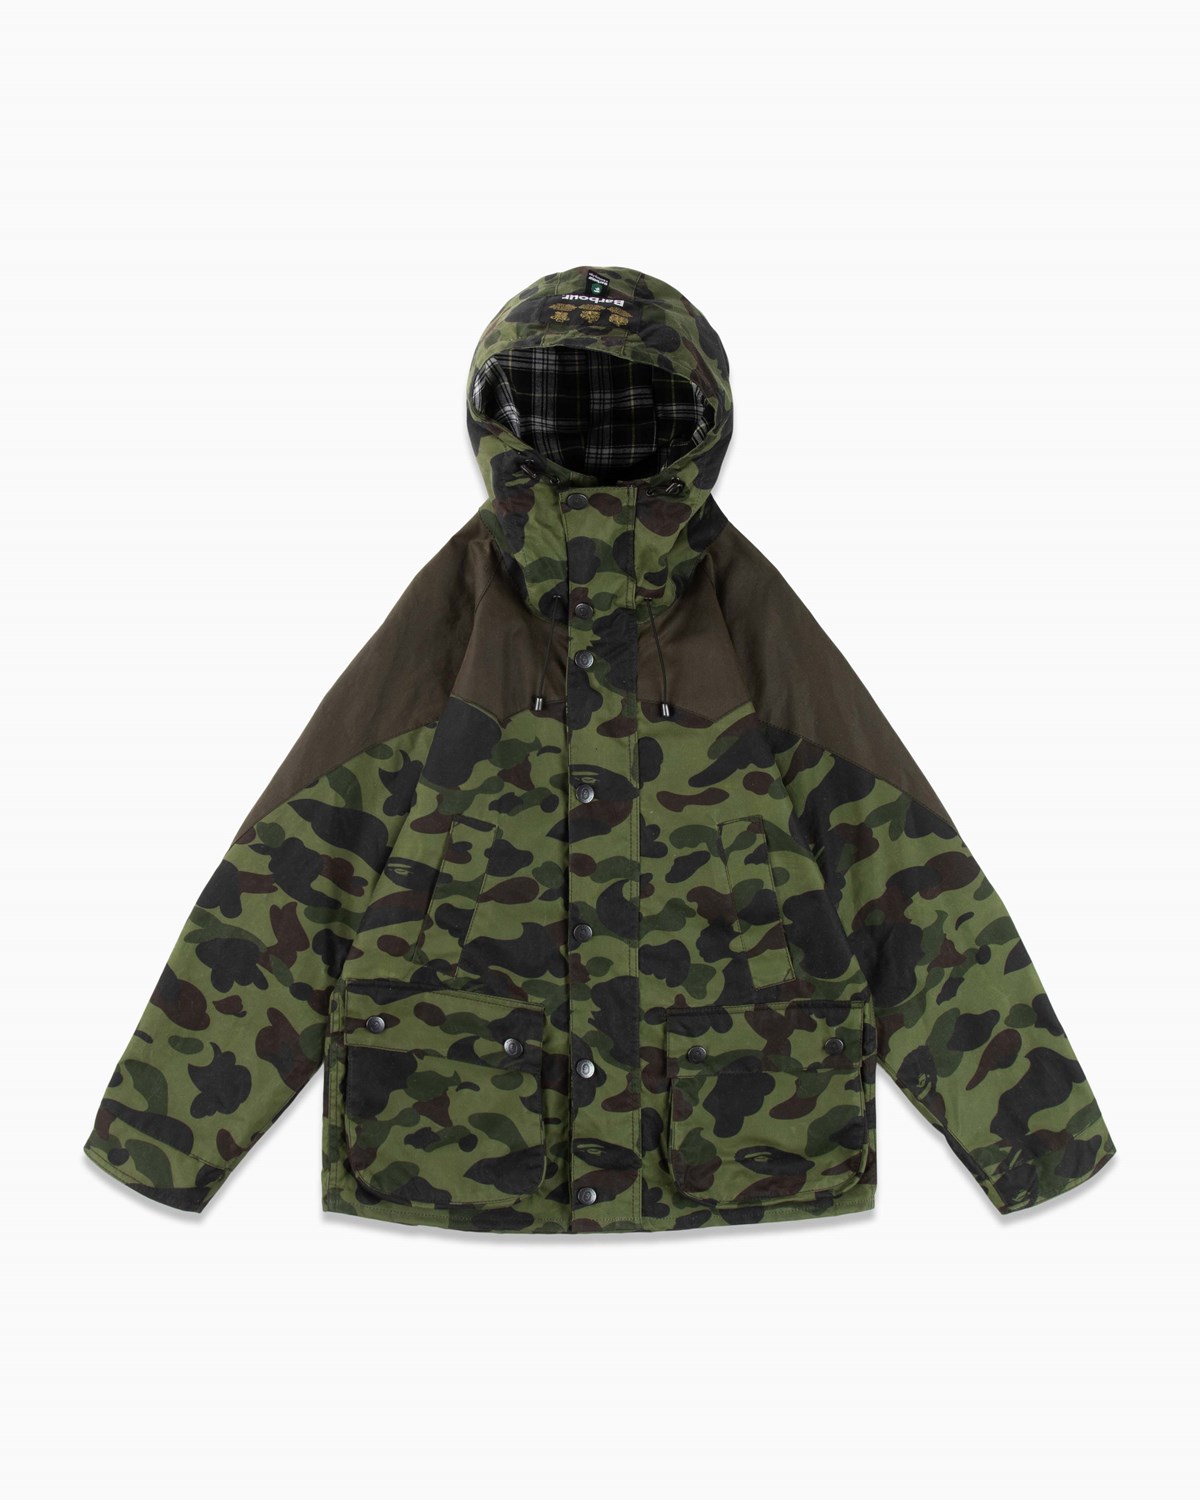 BARBOUR Ｘ BAPE® 1STCAMOBEDALEJACKETご希望額提示お願いいたします